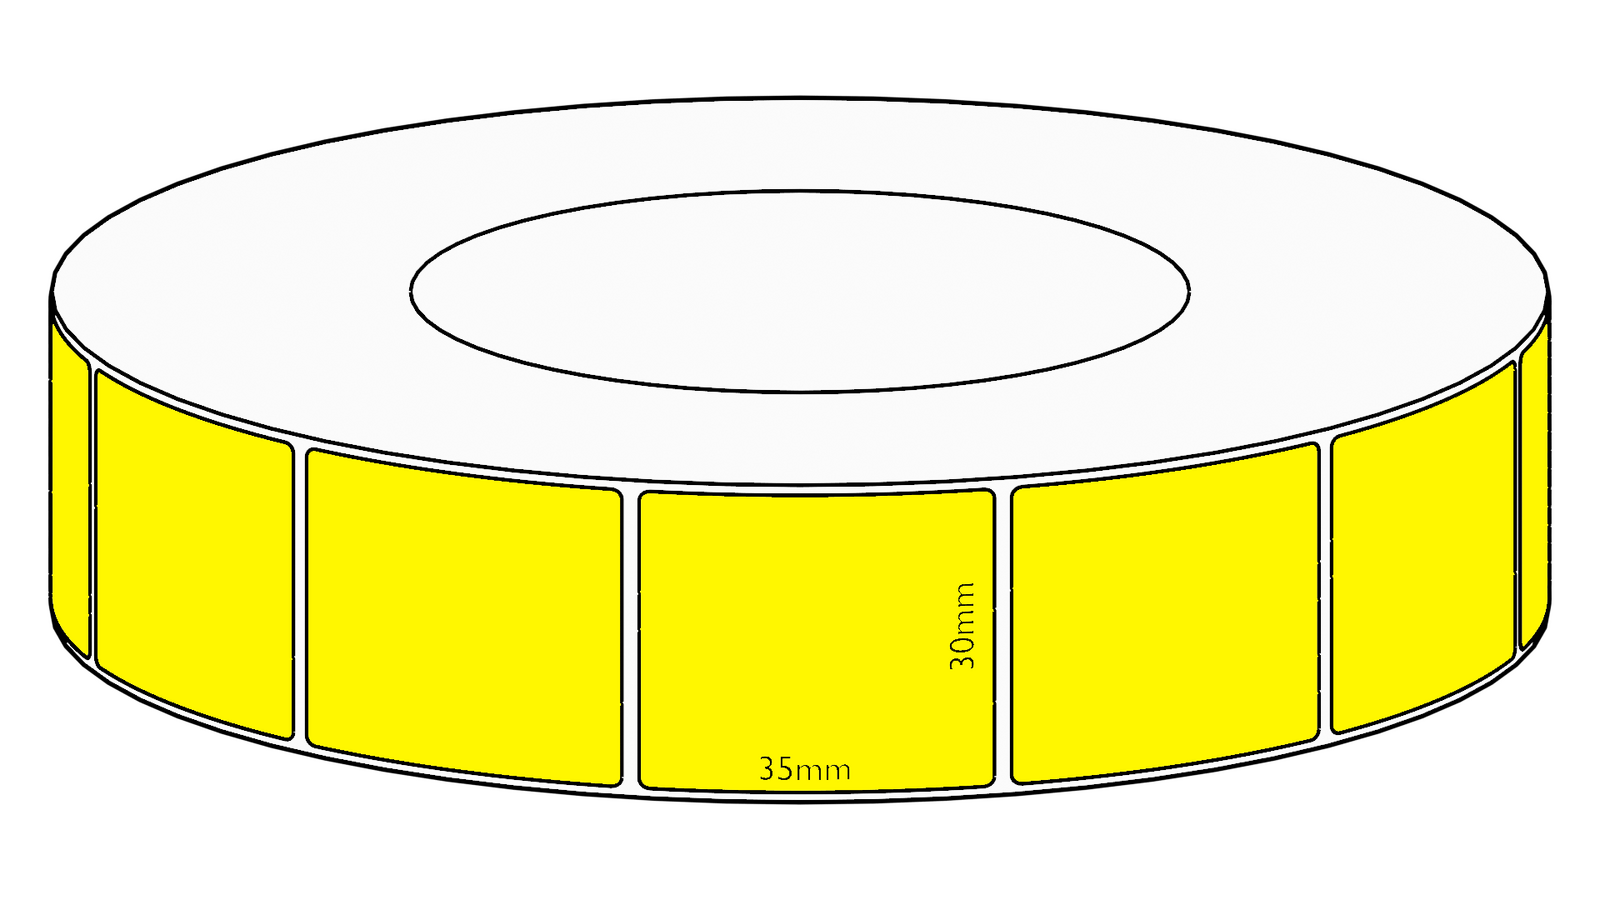 30x35mm Yellow Direct Thermal Permanent Label, 3950 per roll, 76mm core